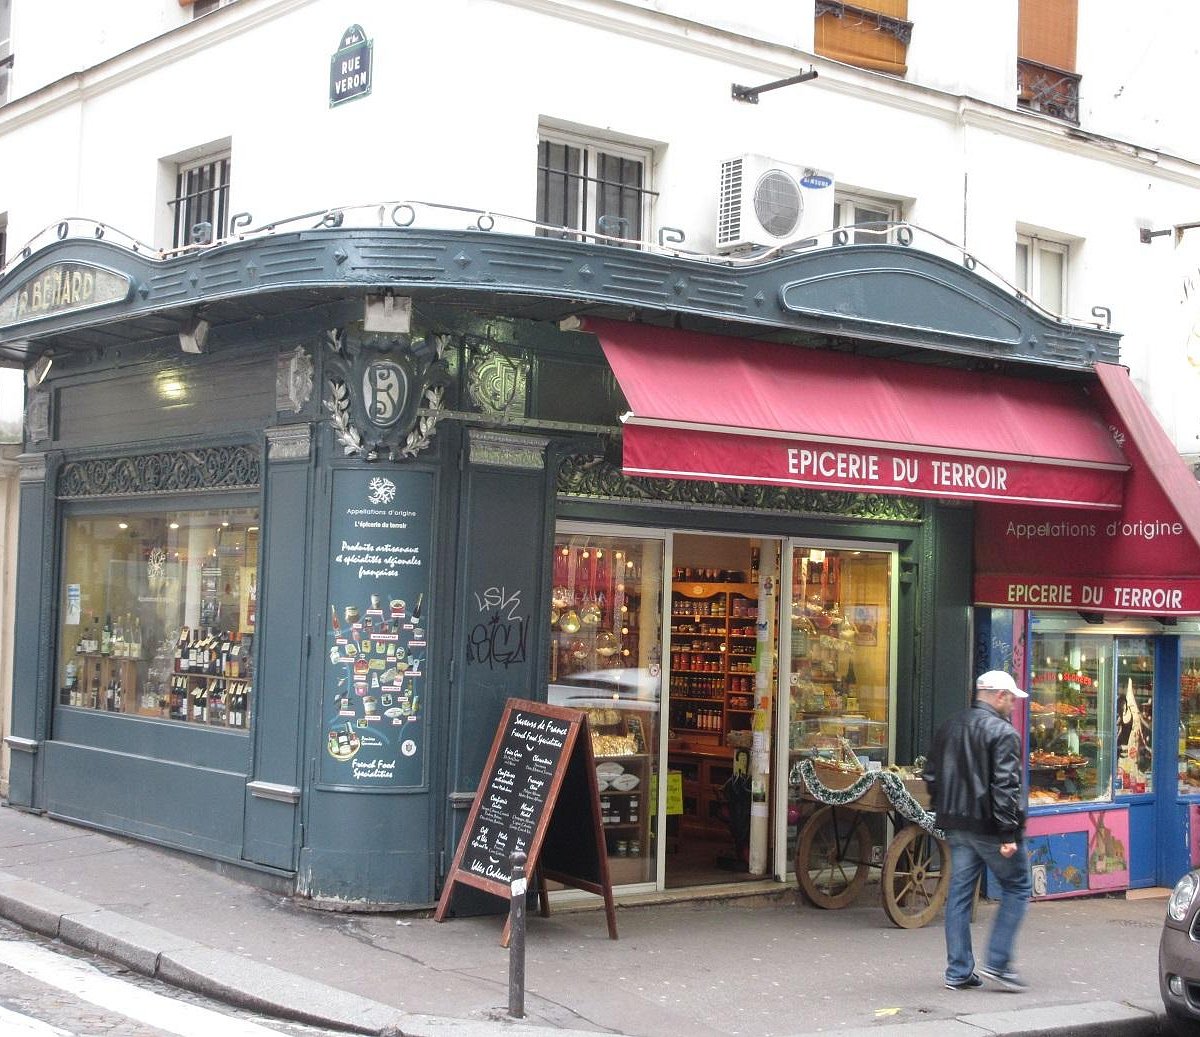 Paris epicerie - a local grocery store in the Marais district of